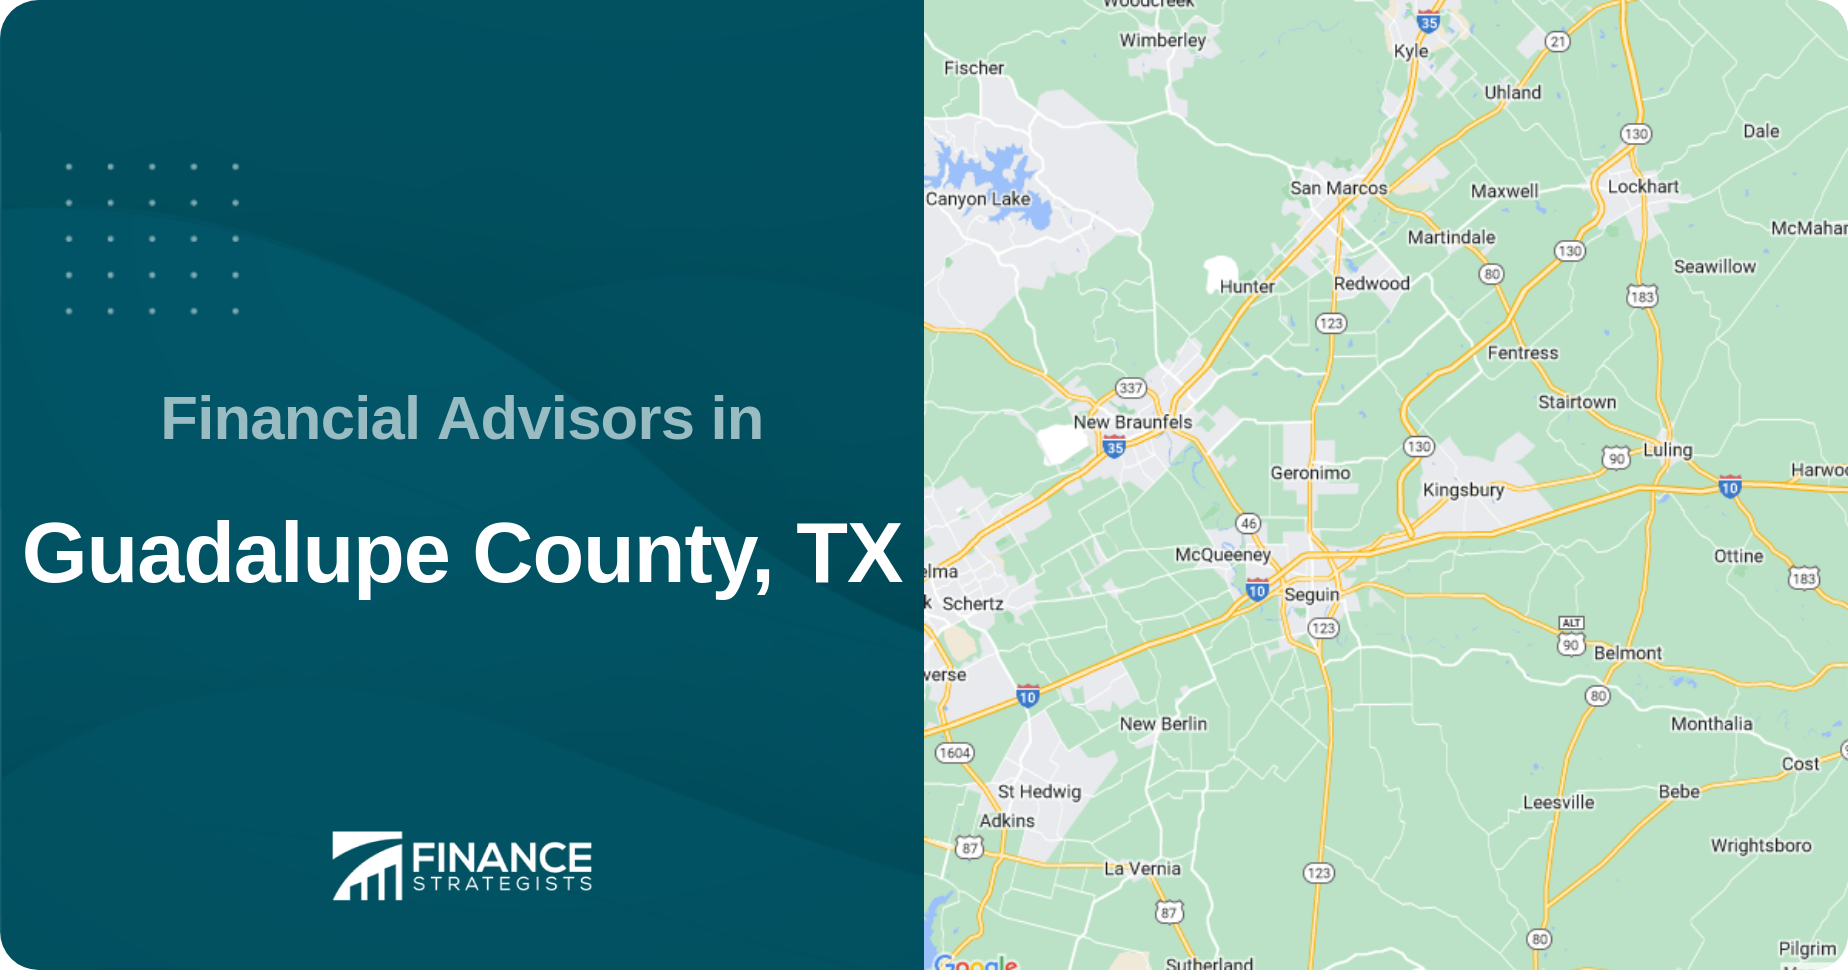 Financial Advisors in Guadalupe County, TX